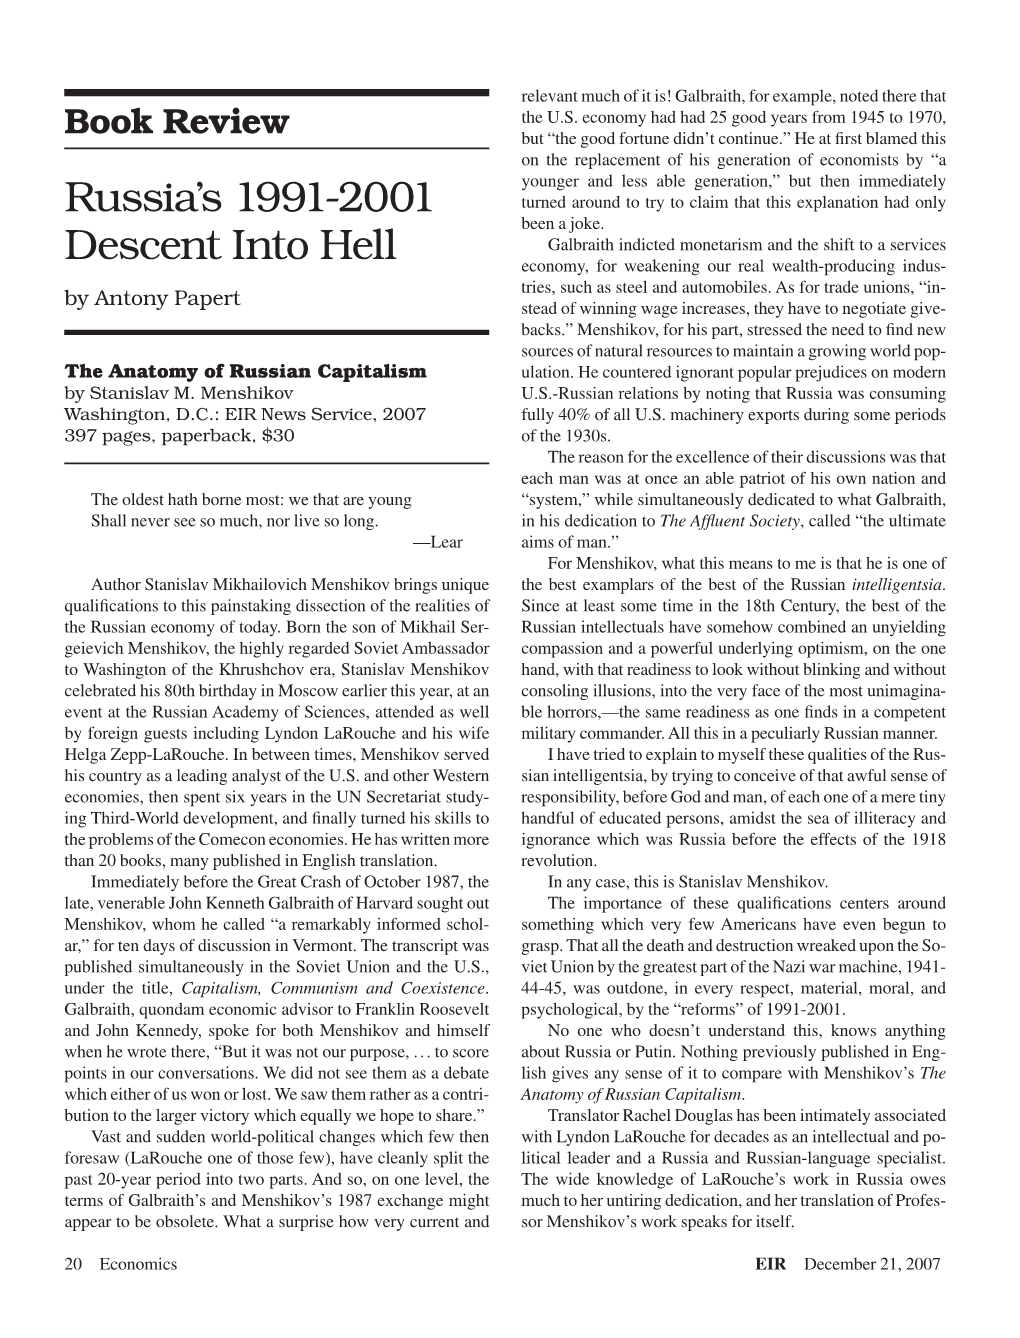 Russia's 1991-2001 Descent Into Hell